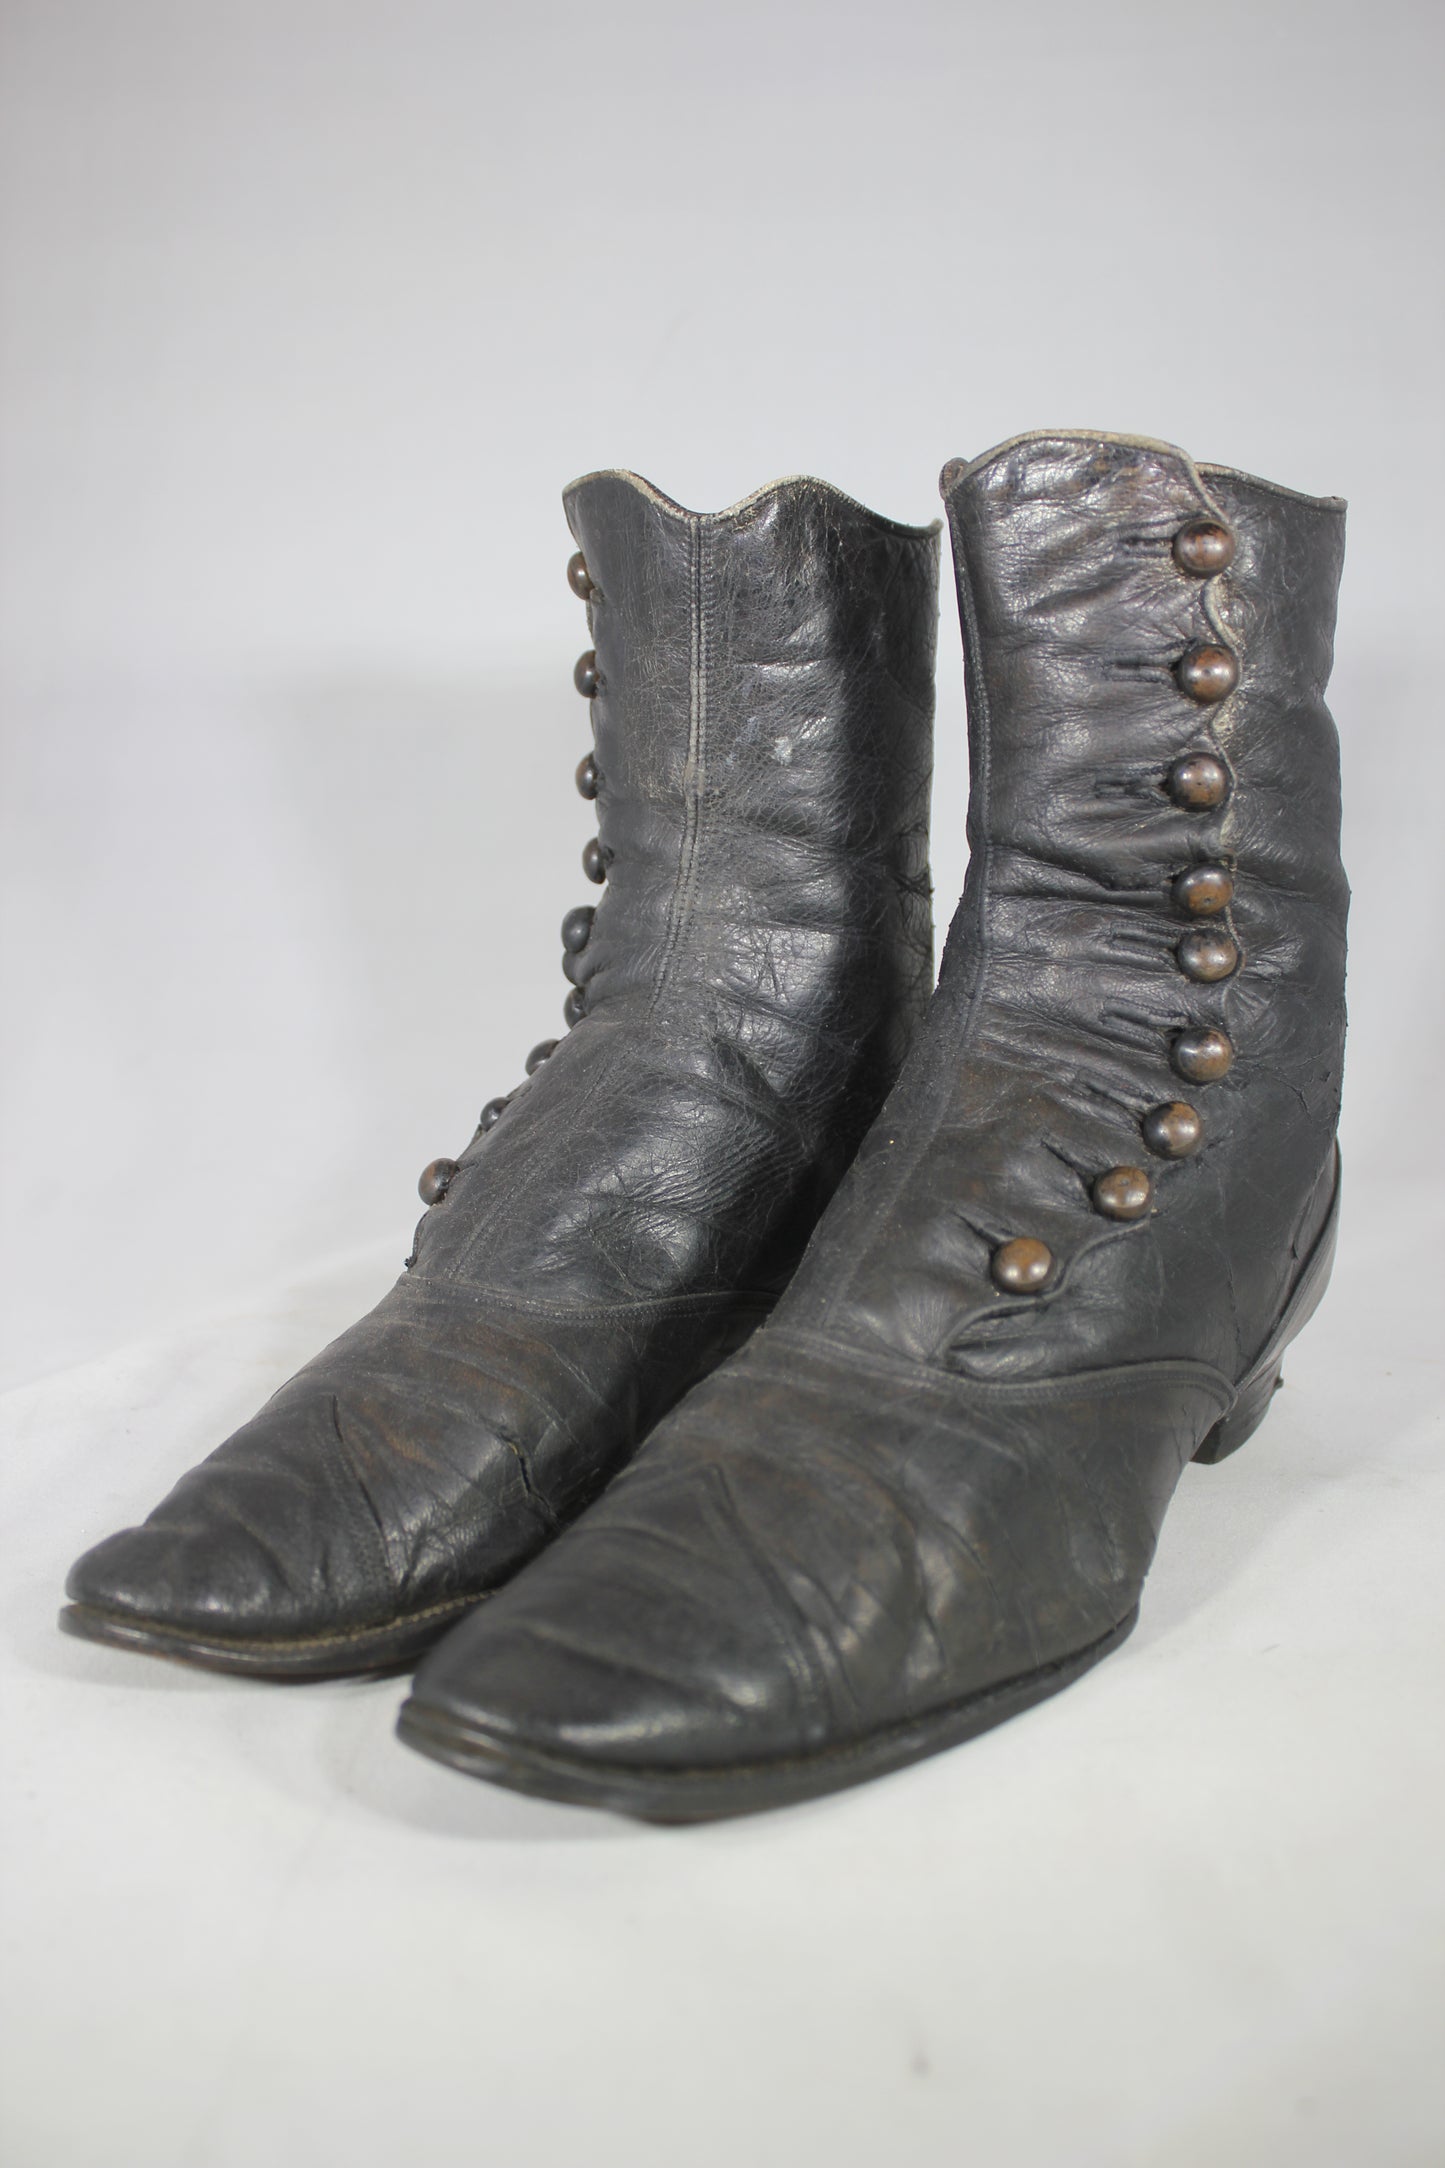 Victorian Button-Up Black Leather Women's Boots, High-Top Shoes